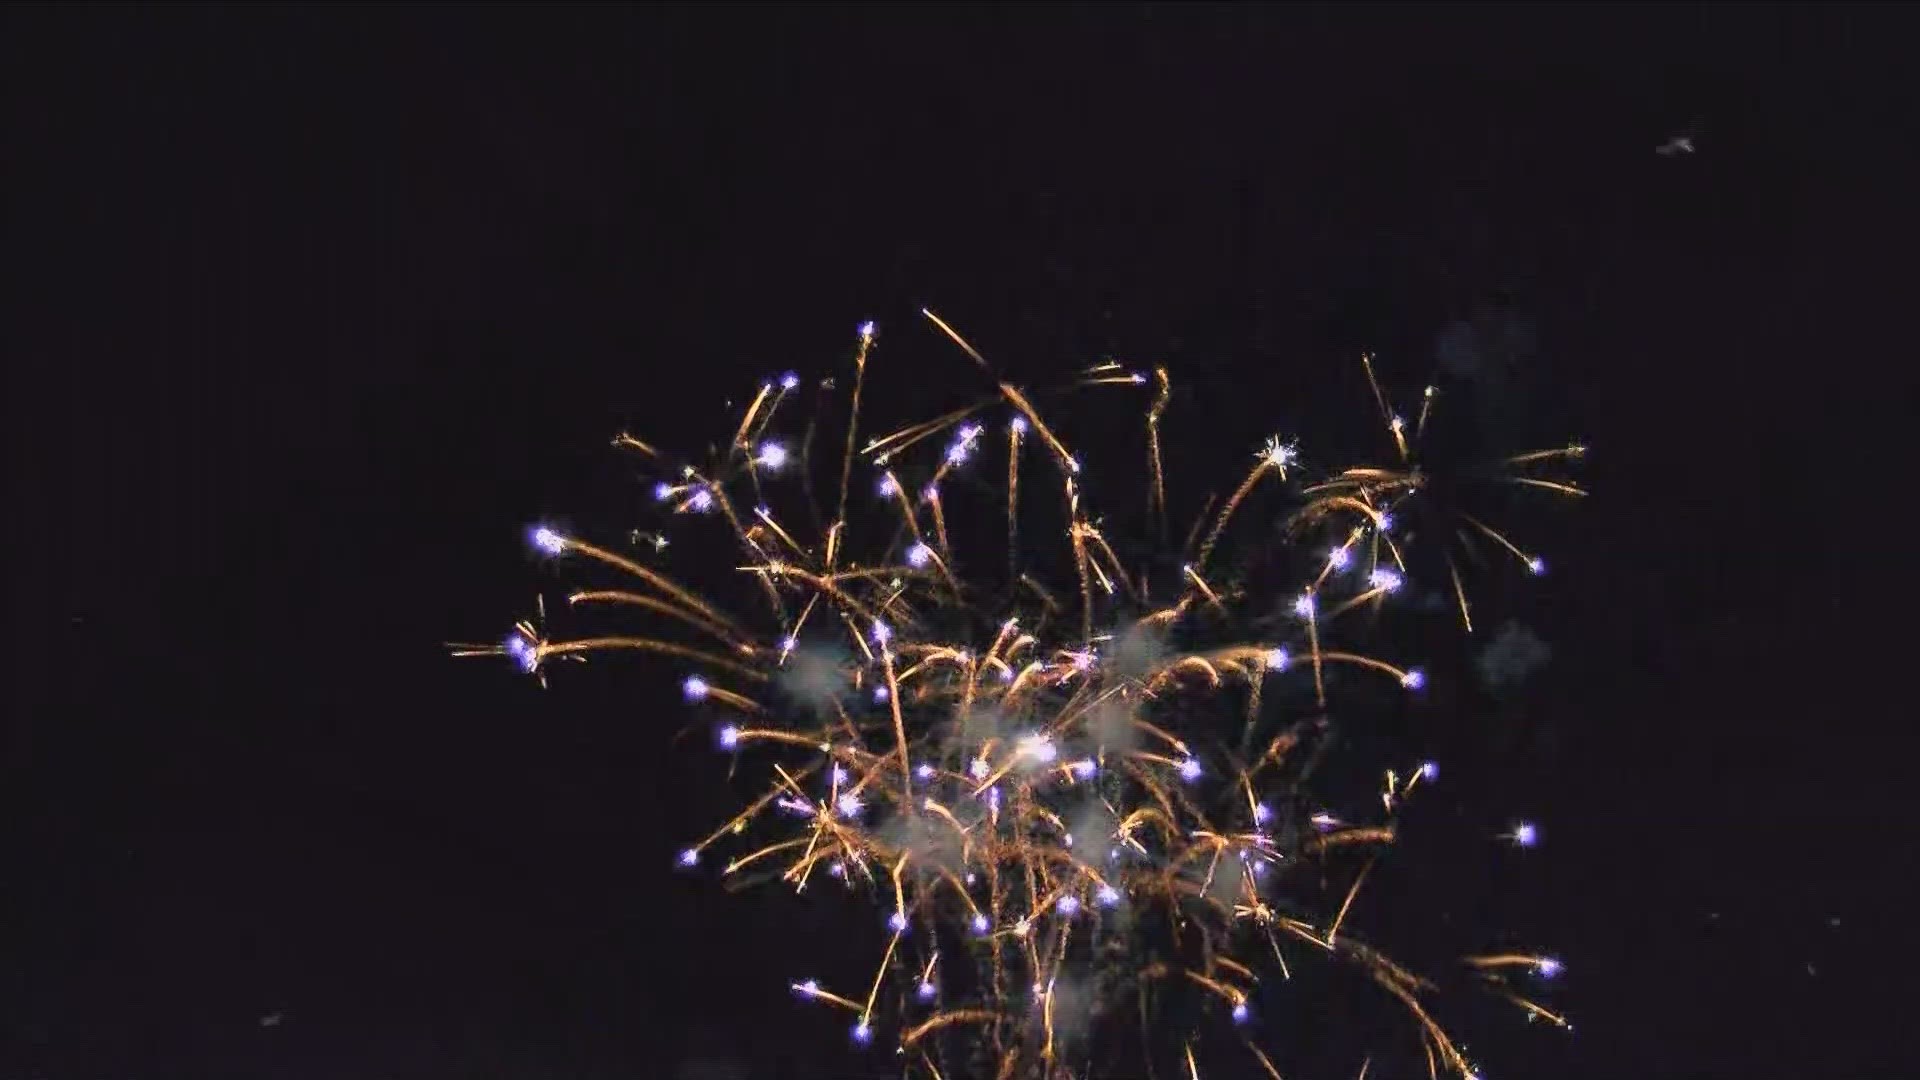 Cities like Perrysburg and Maumee are following the states law when it comes to fireworks and allows their residents to light them up